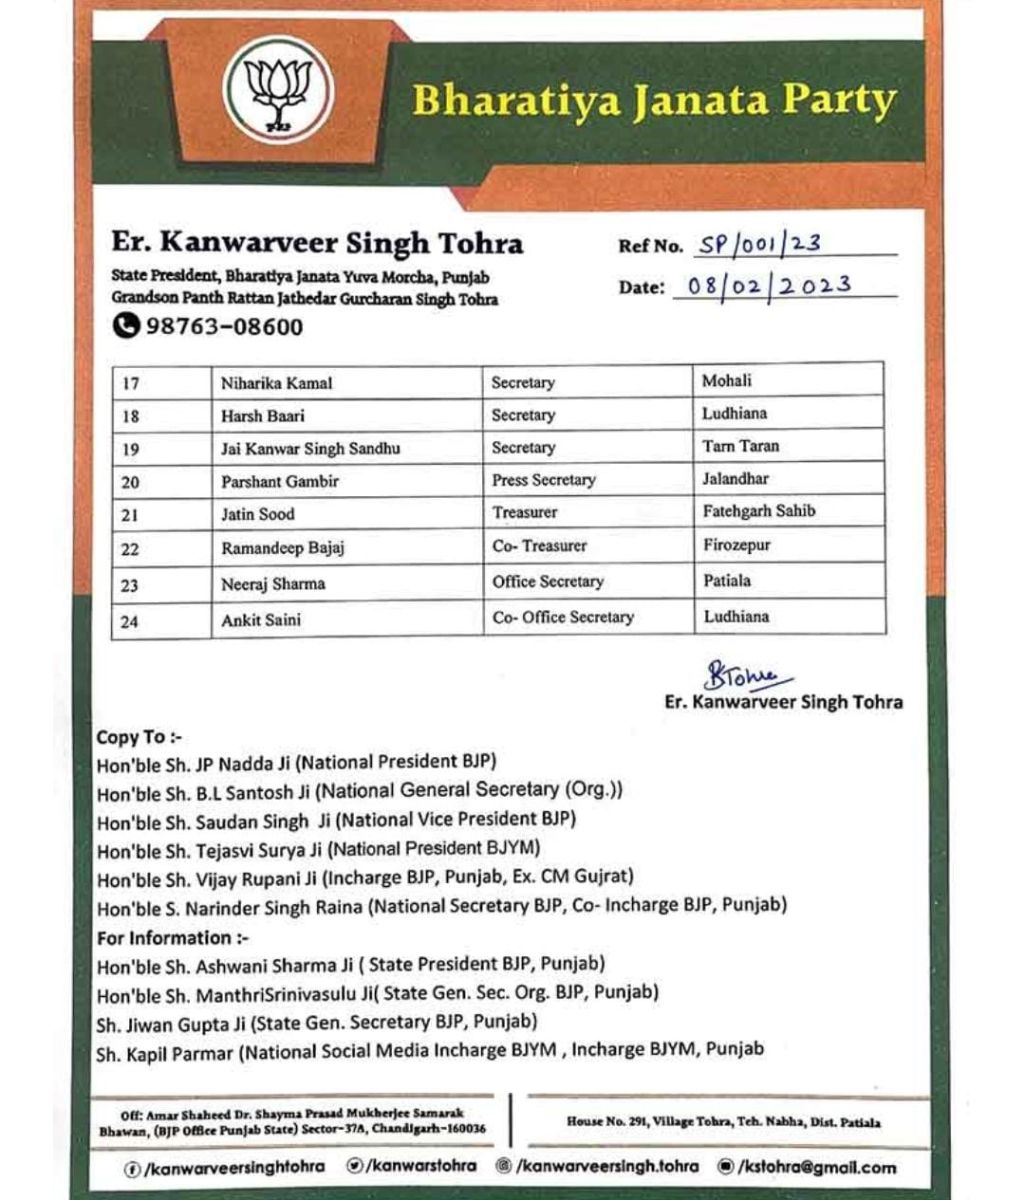 Punjab BJP New Appointments